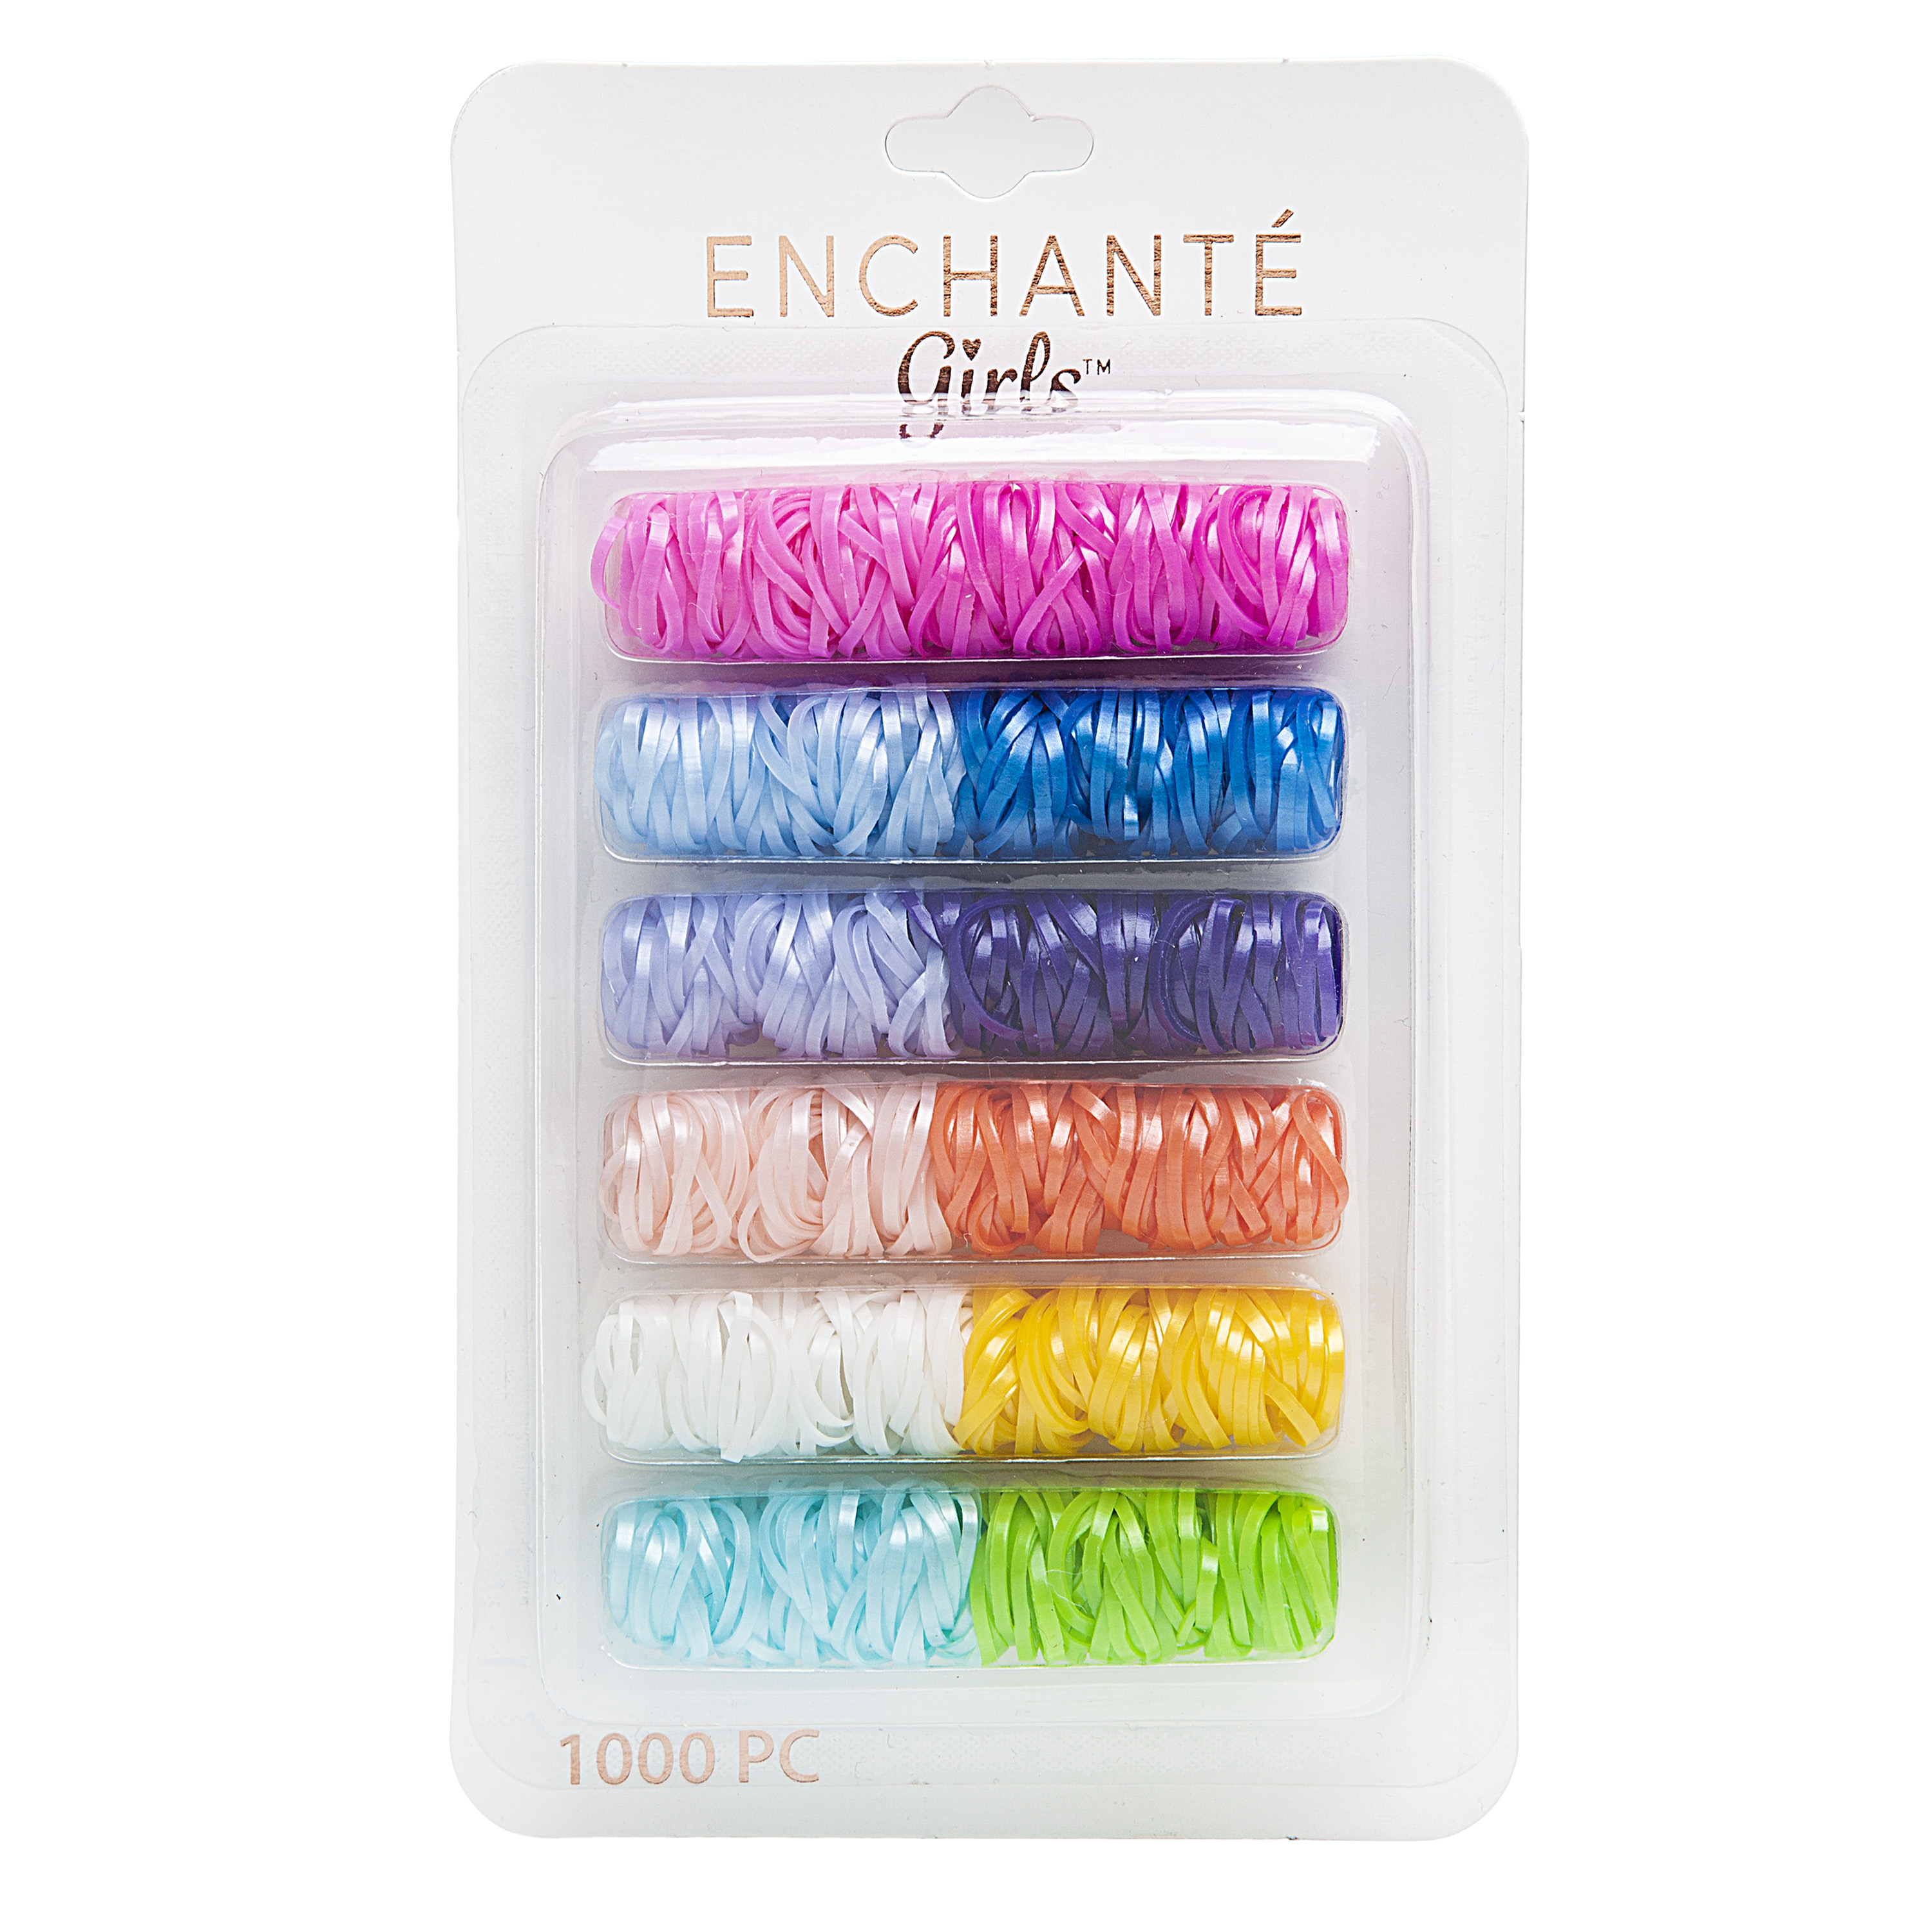 Enchante Accessories Girls' Polyband Elastic Hair Ties, Assorted Colors, 1000 Count - image 1 of 9